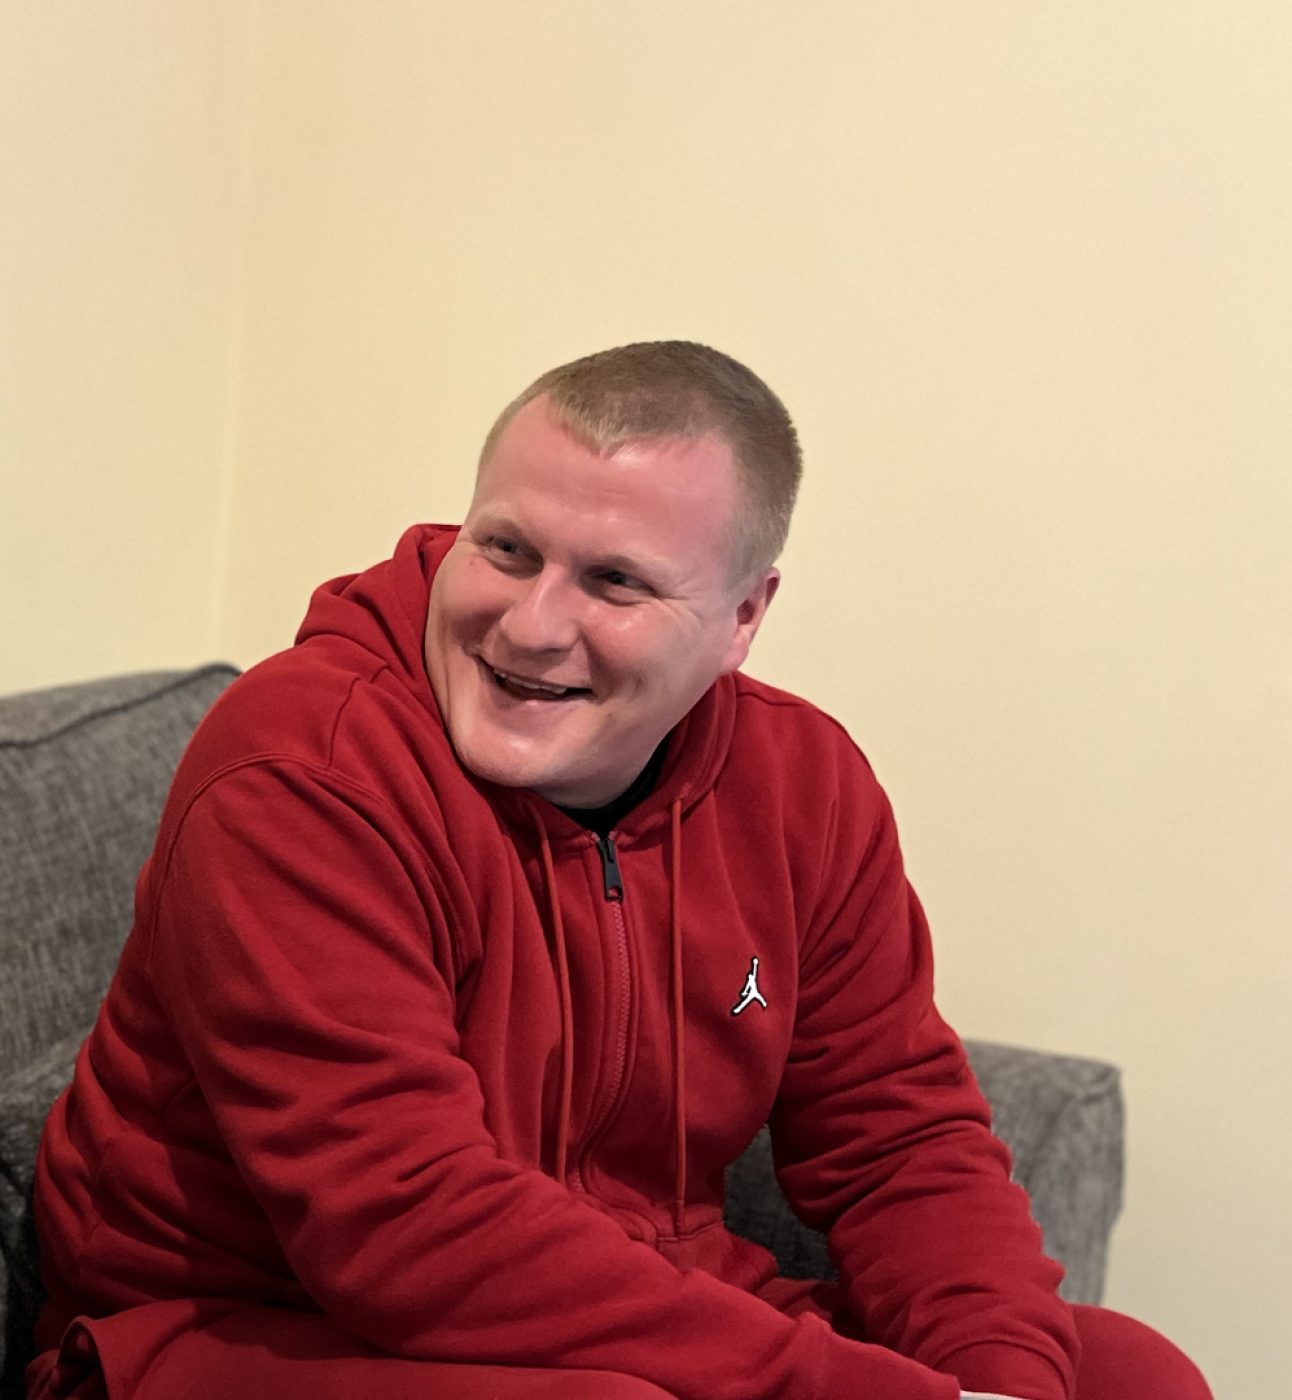 image of service user with ex-service personnel worker.